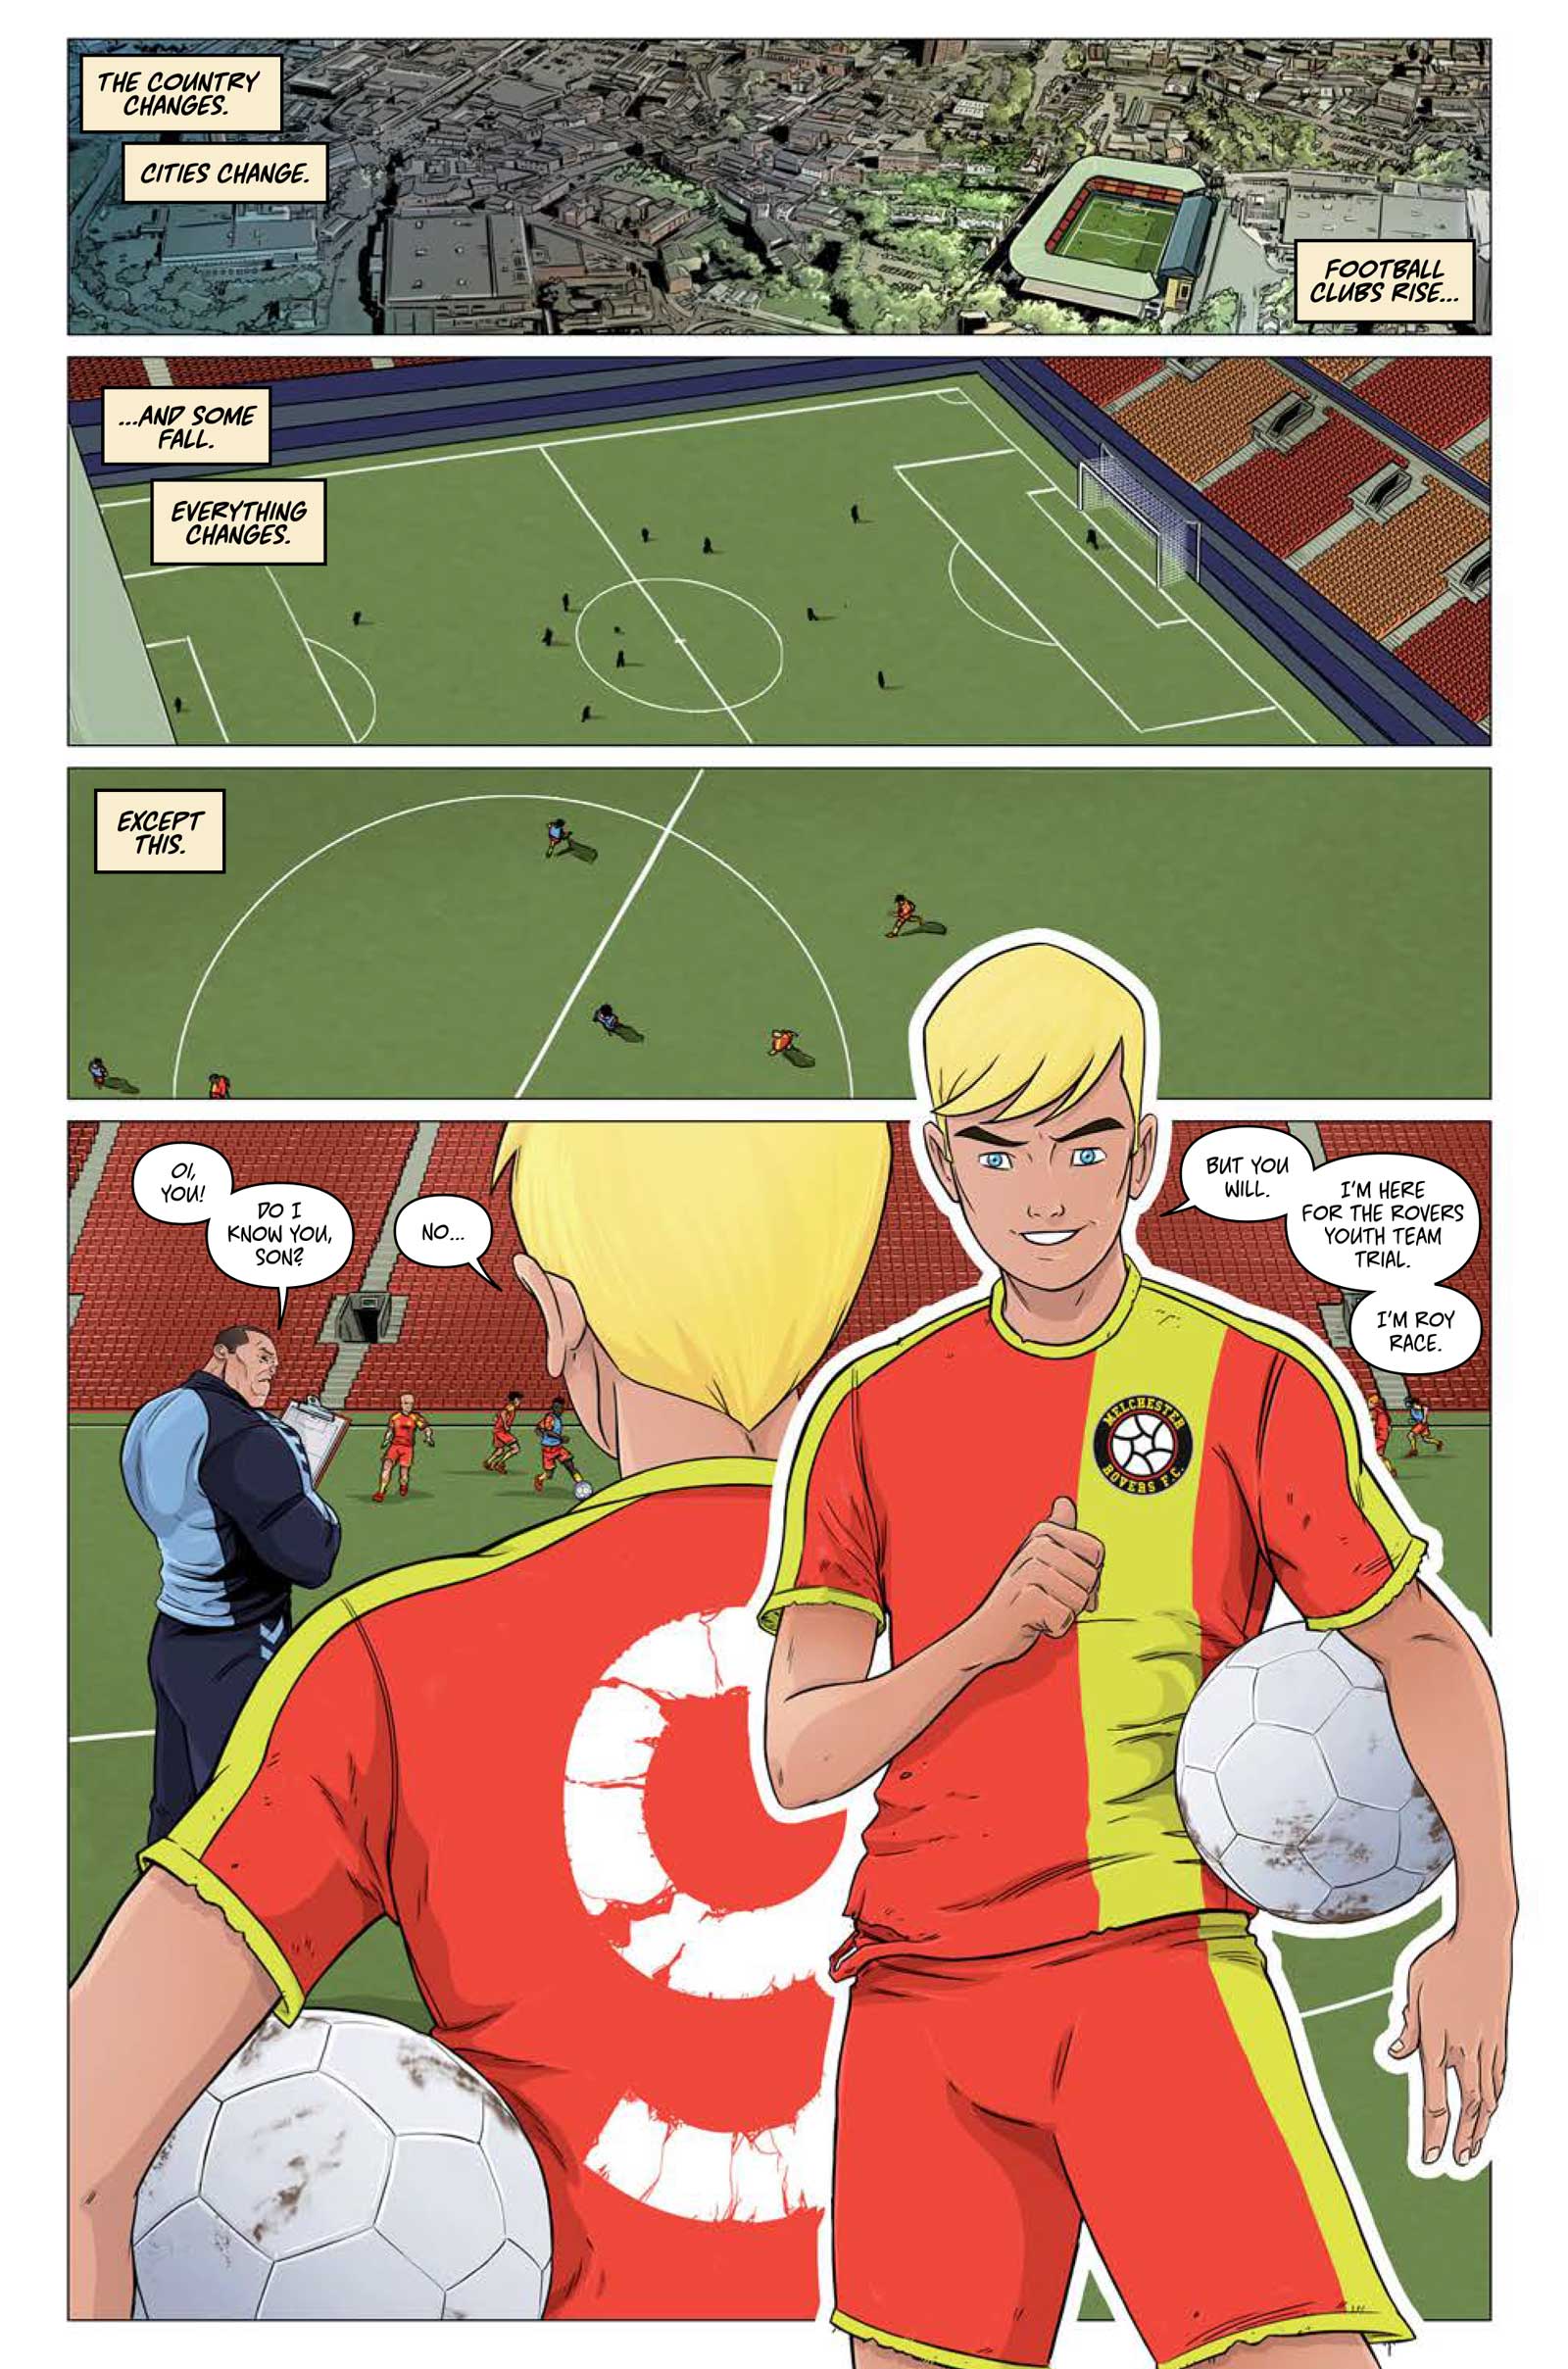 A page from Roy of the Rovers - Kick Off by Rob Williams and Ben Willsher © Rebellion Publishing Ltd.